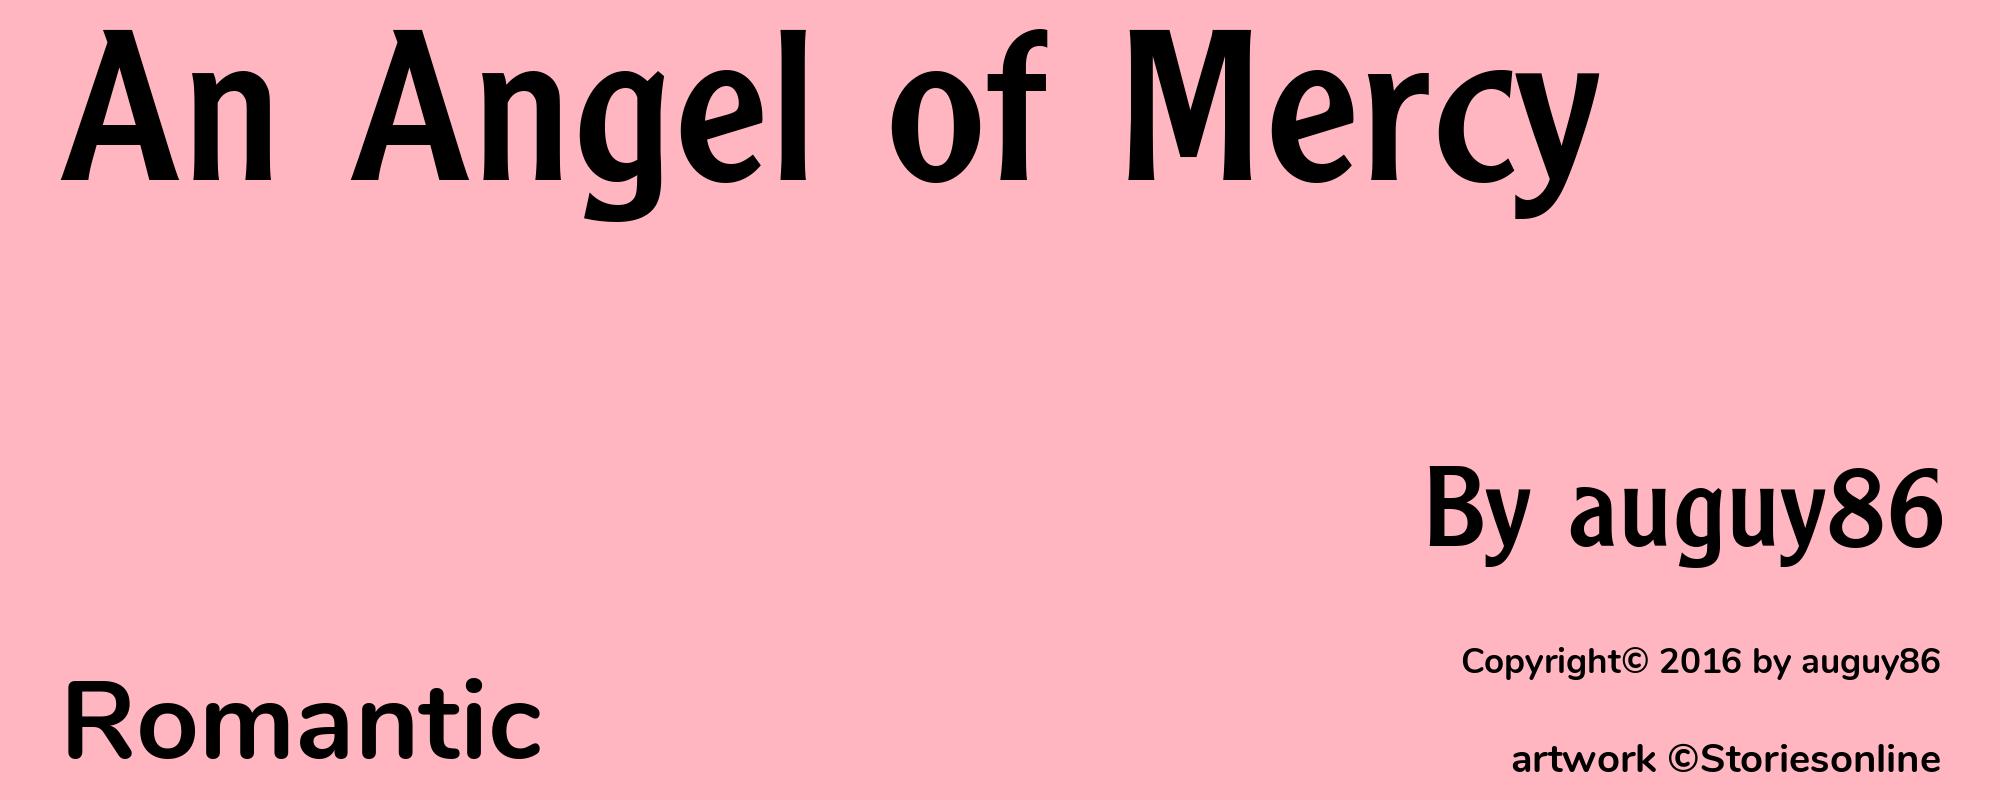 An Angel of Mercy - Cover